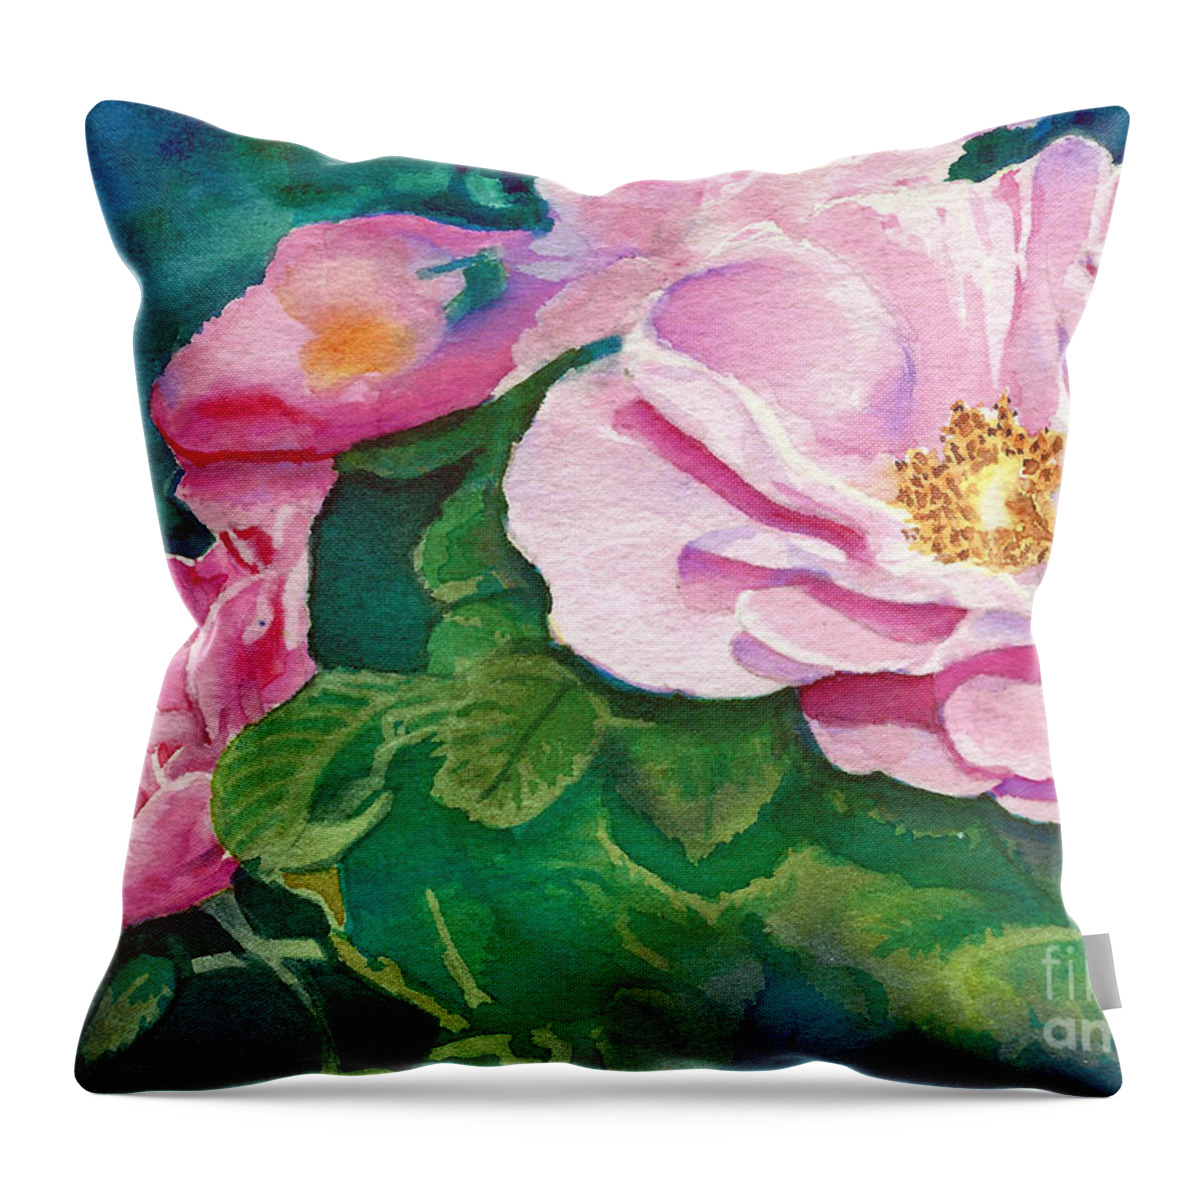 Rose Ladder Throw Pillow featuring the painting Rose Ladder by Daniela Easter